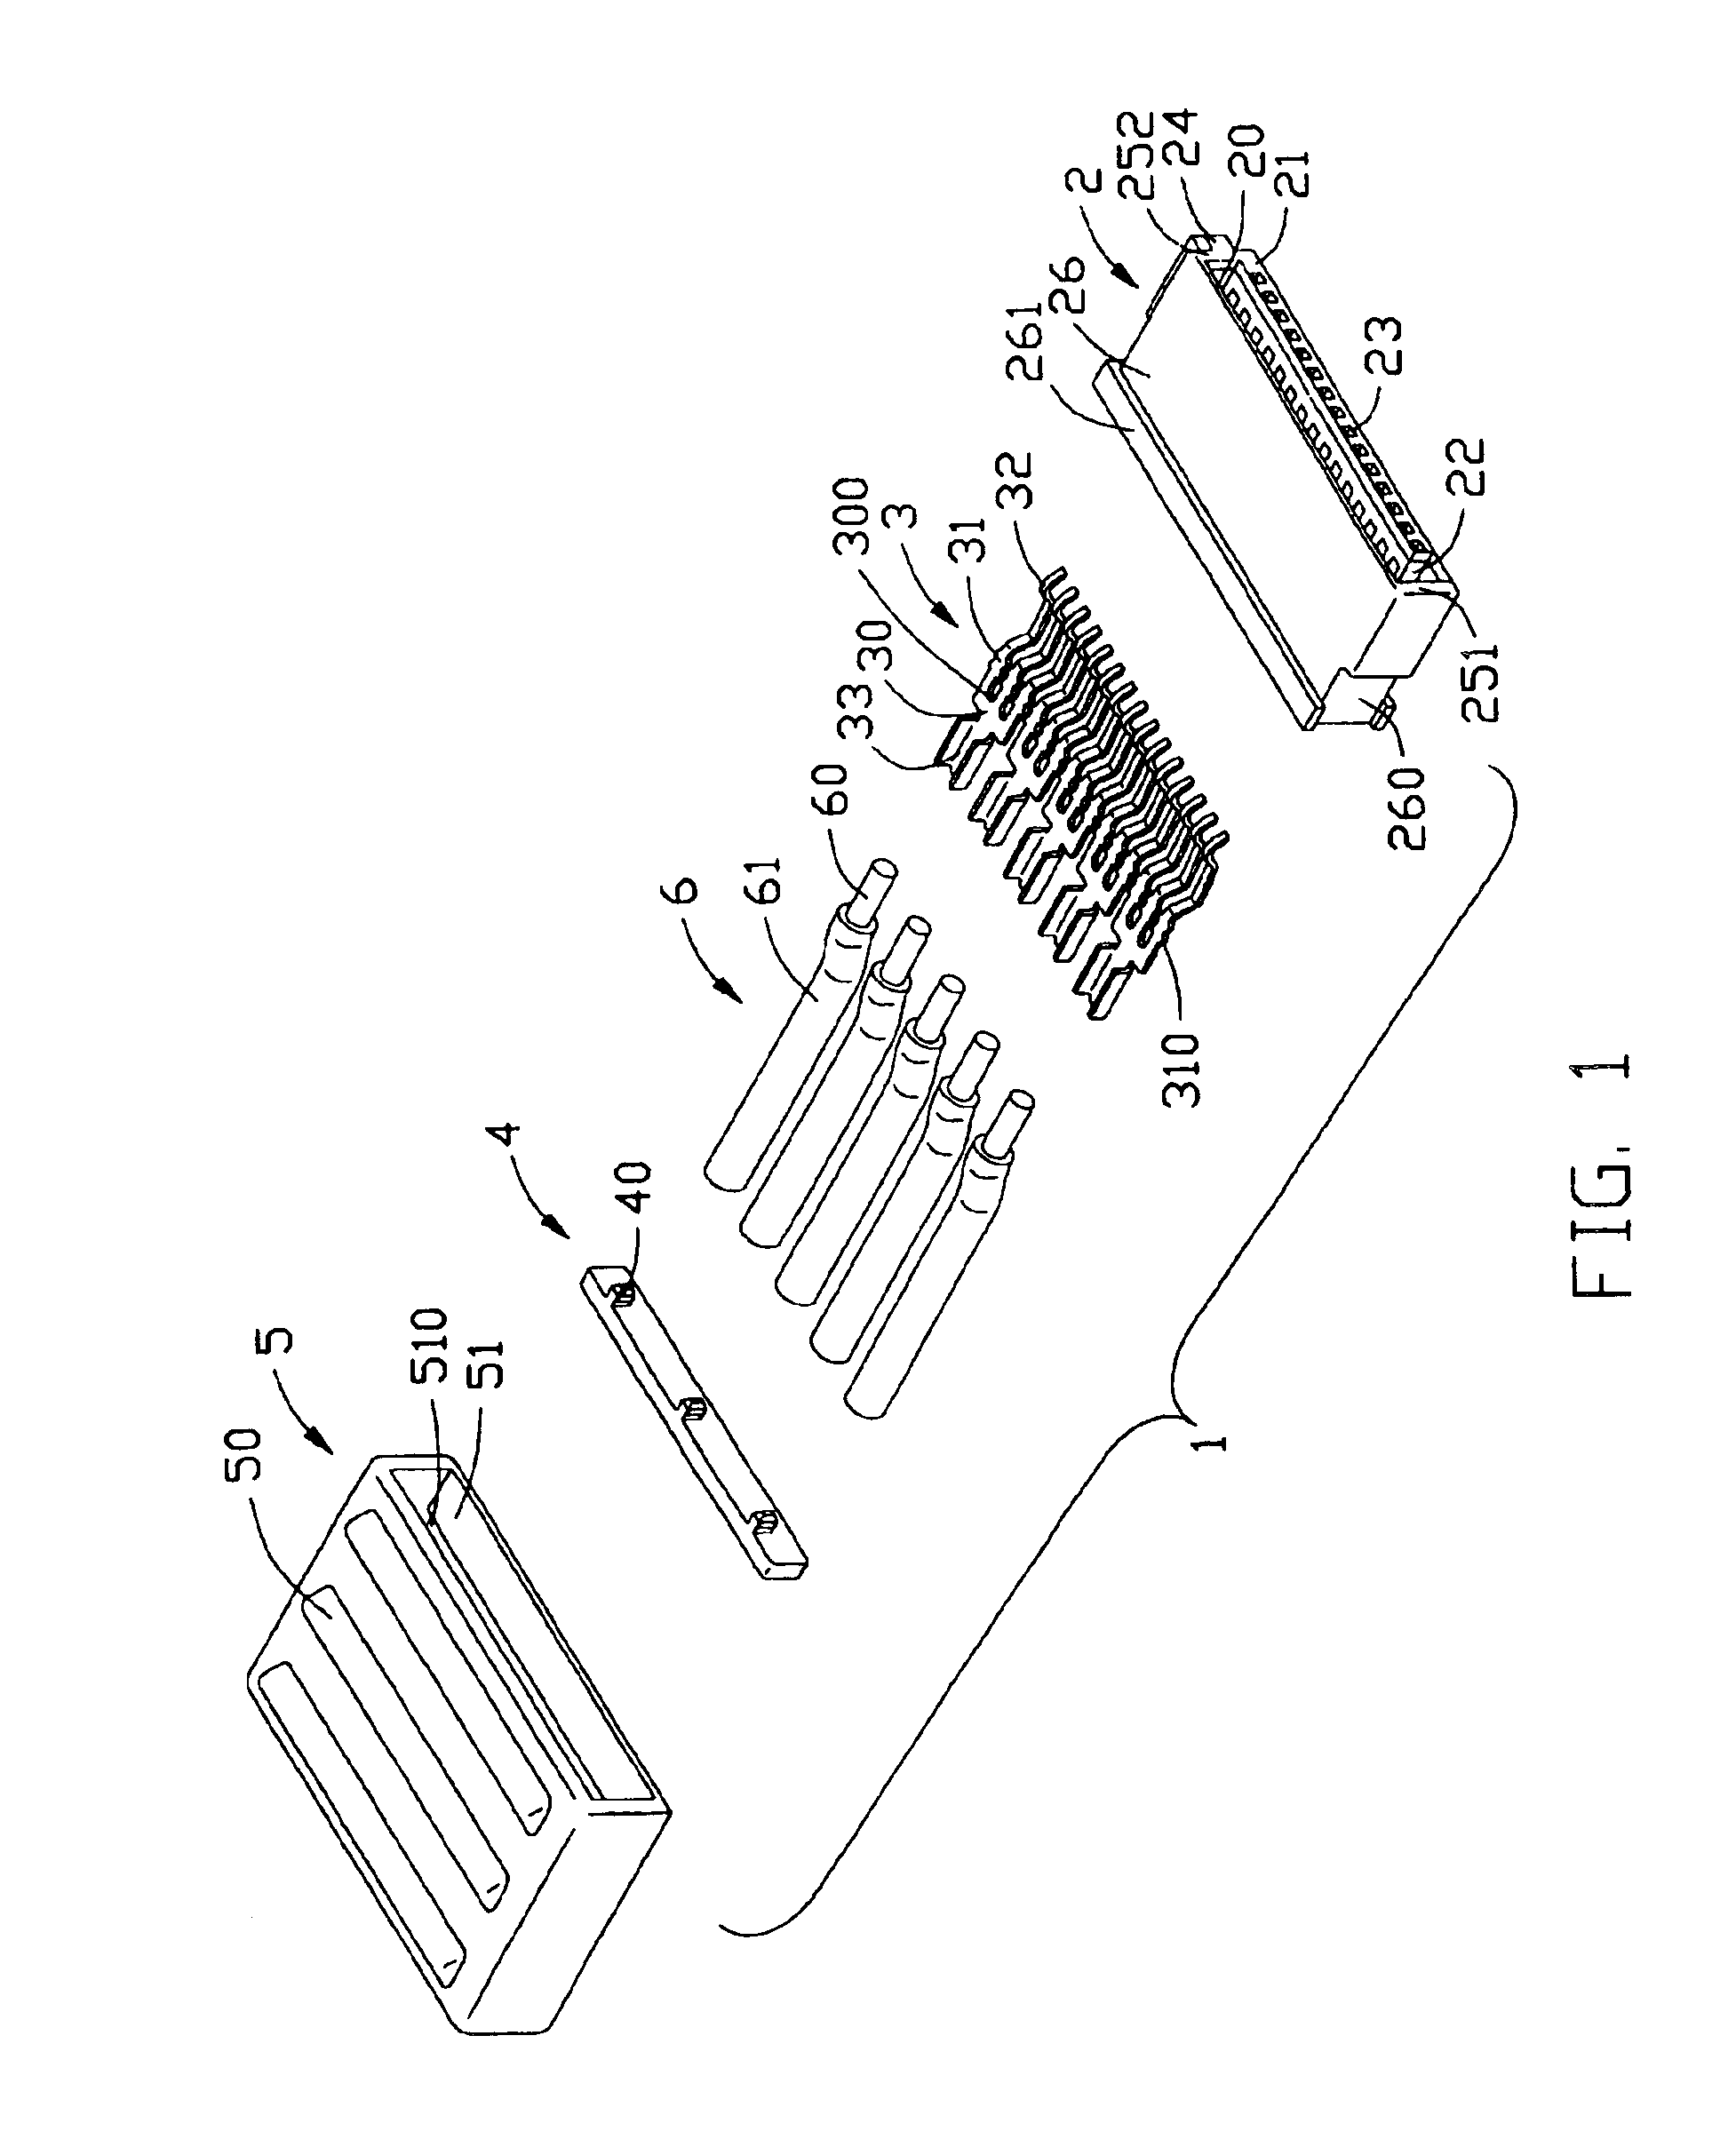 Cable end connector assembly and the method of making the same